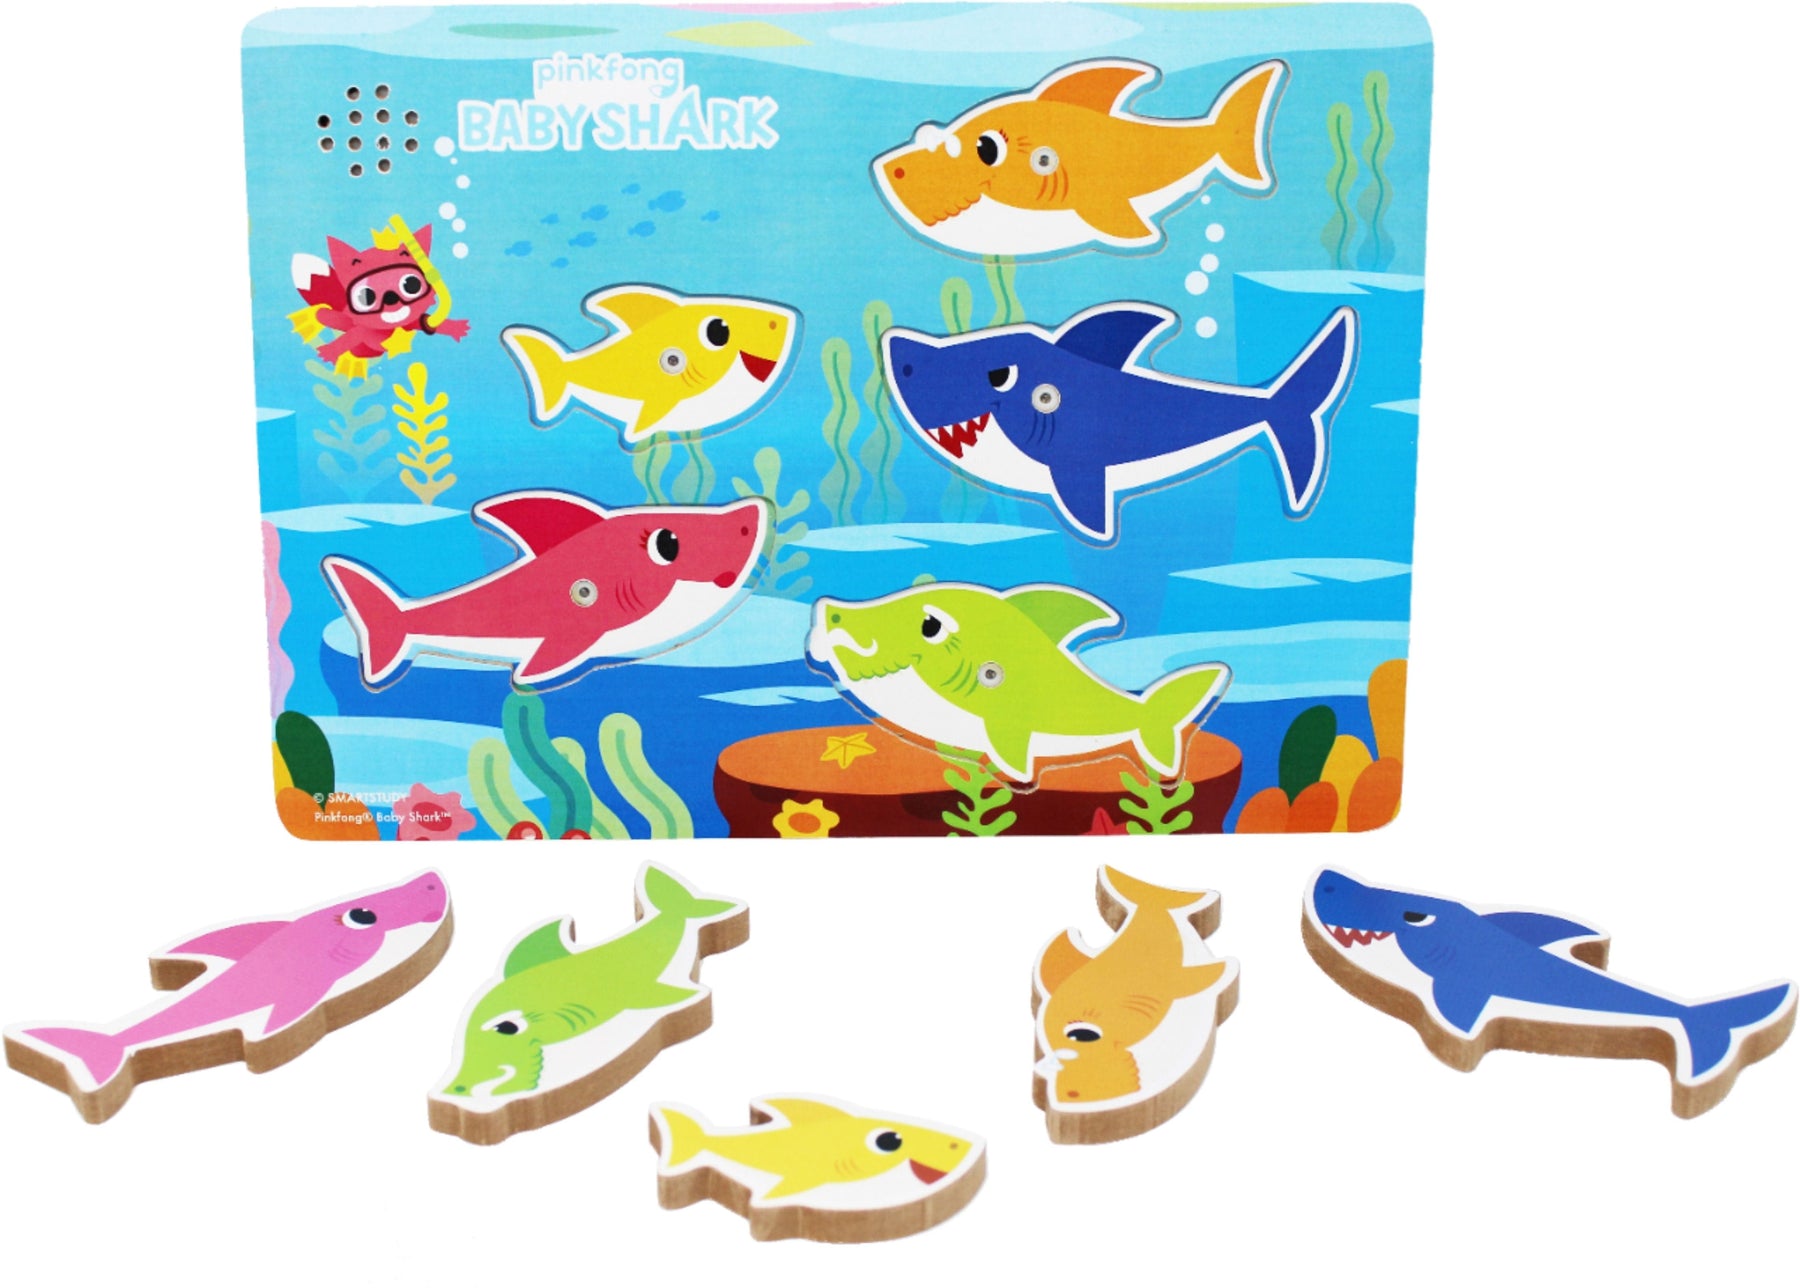 Pinkfong: Chunky Wood Sound Puzzle - Plays Baby Shark